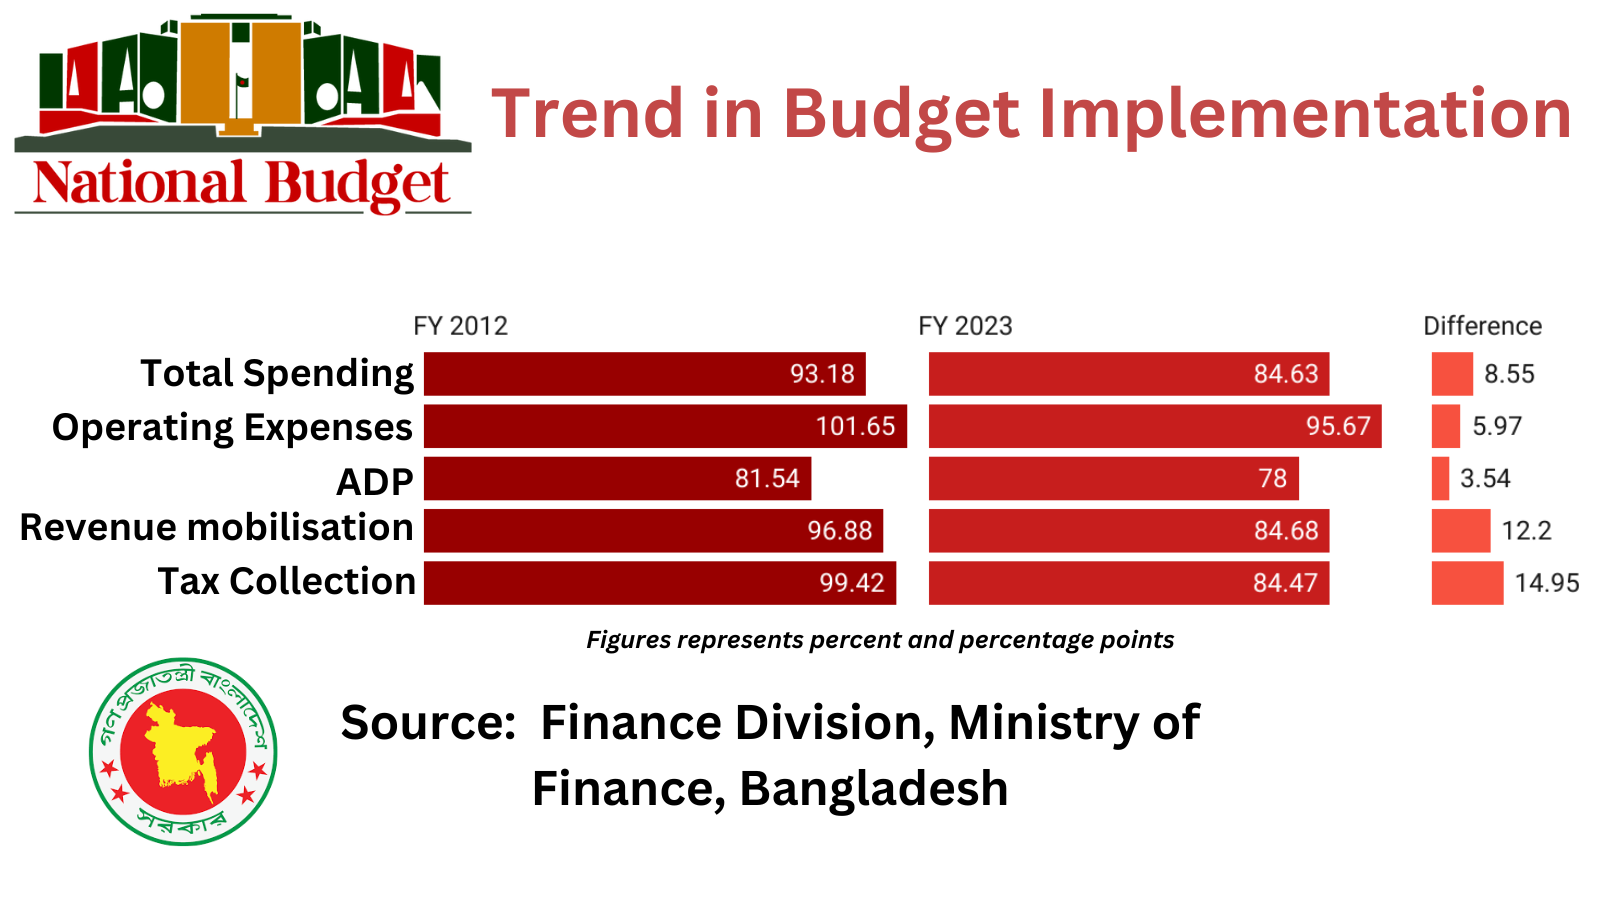 A bucket with holes: Budget implementation rate declines over the decade